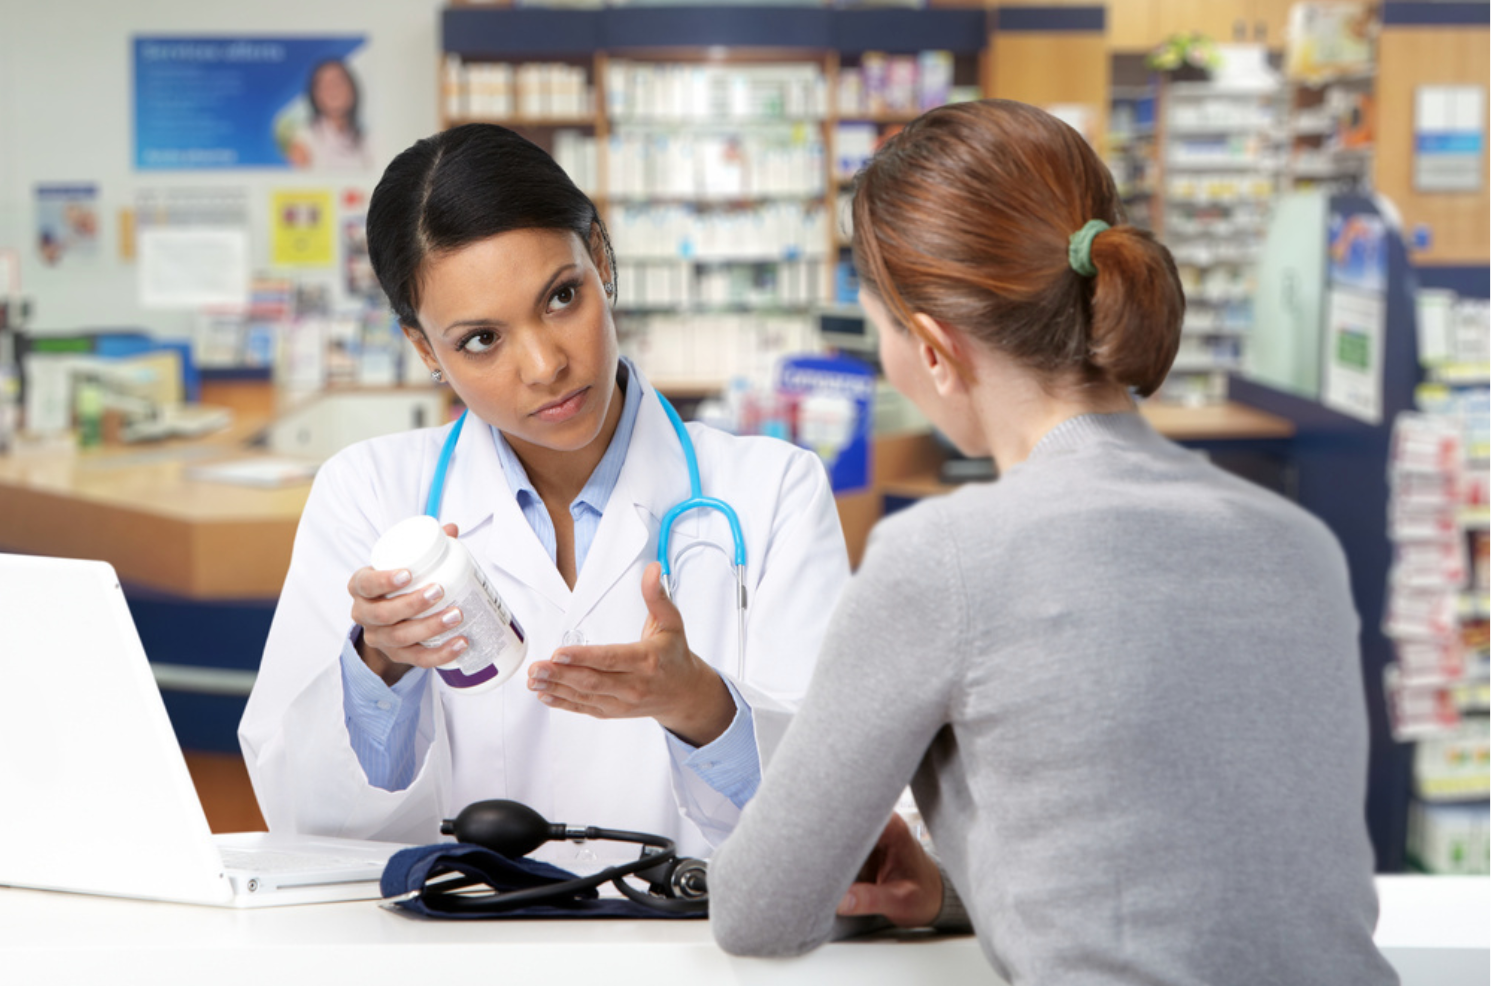 Women Pharmacists Day: The Evolution of Women’s Role in US Pharmacy Practice